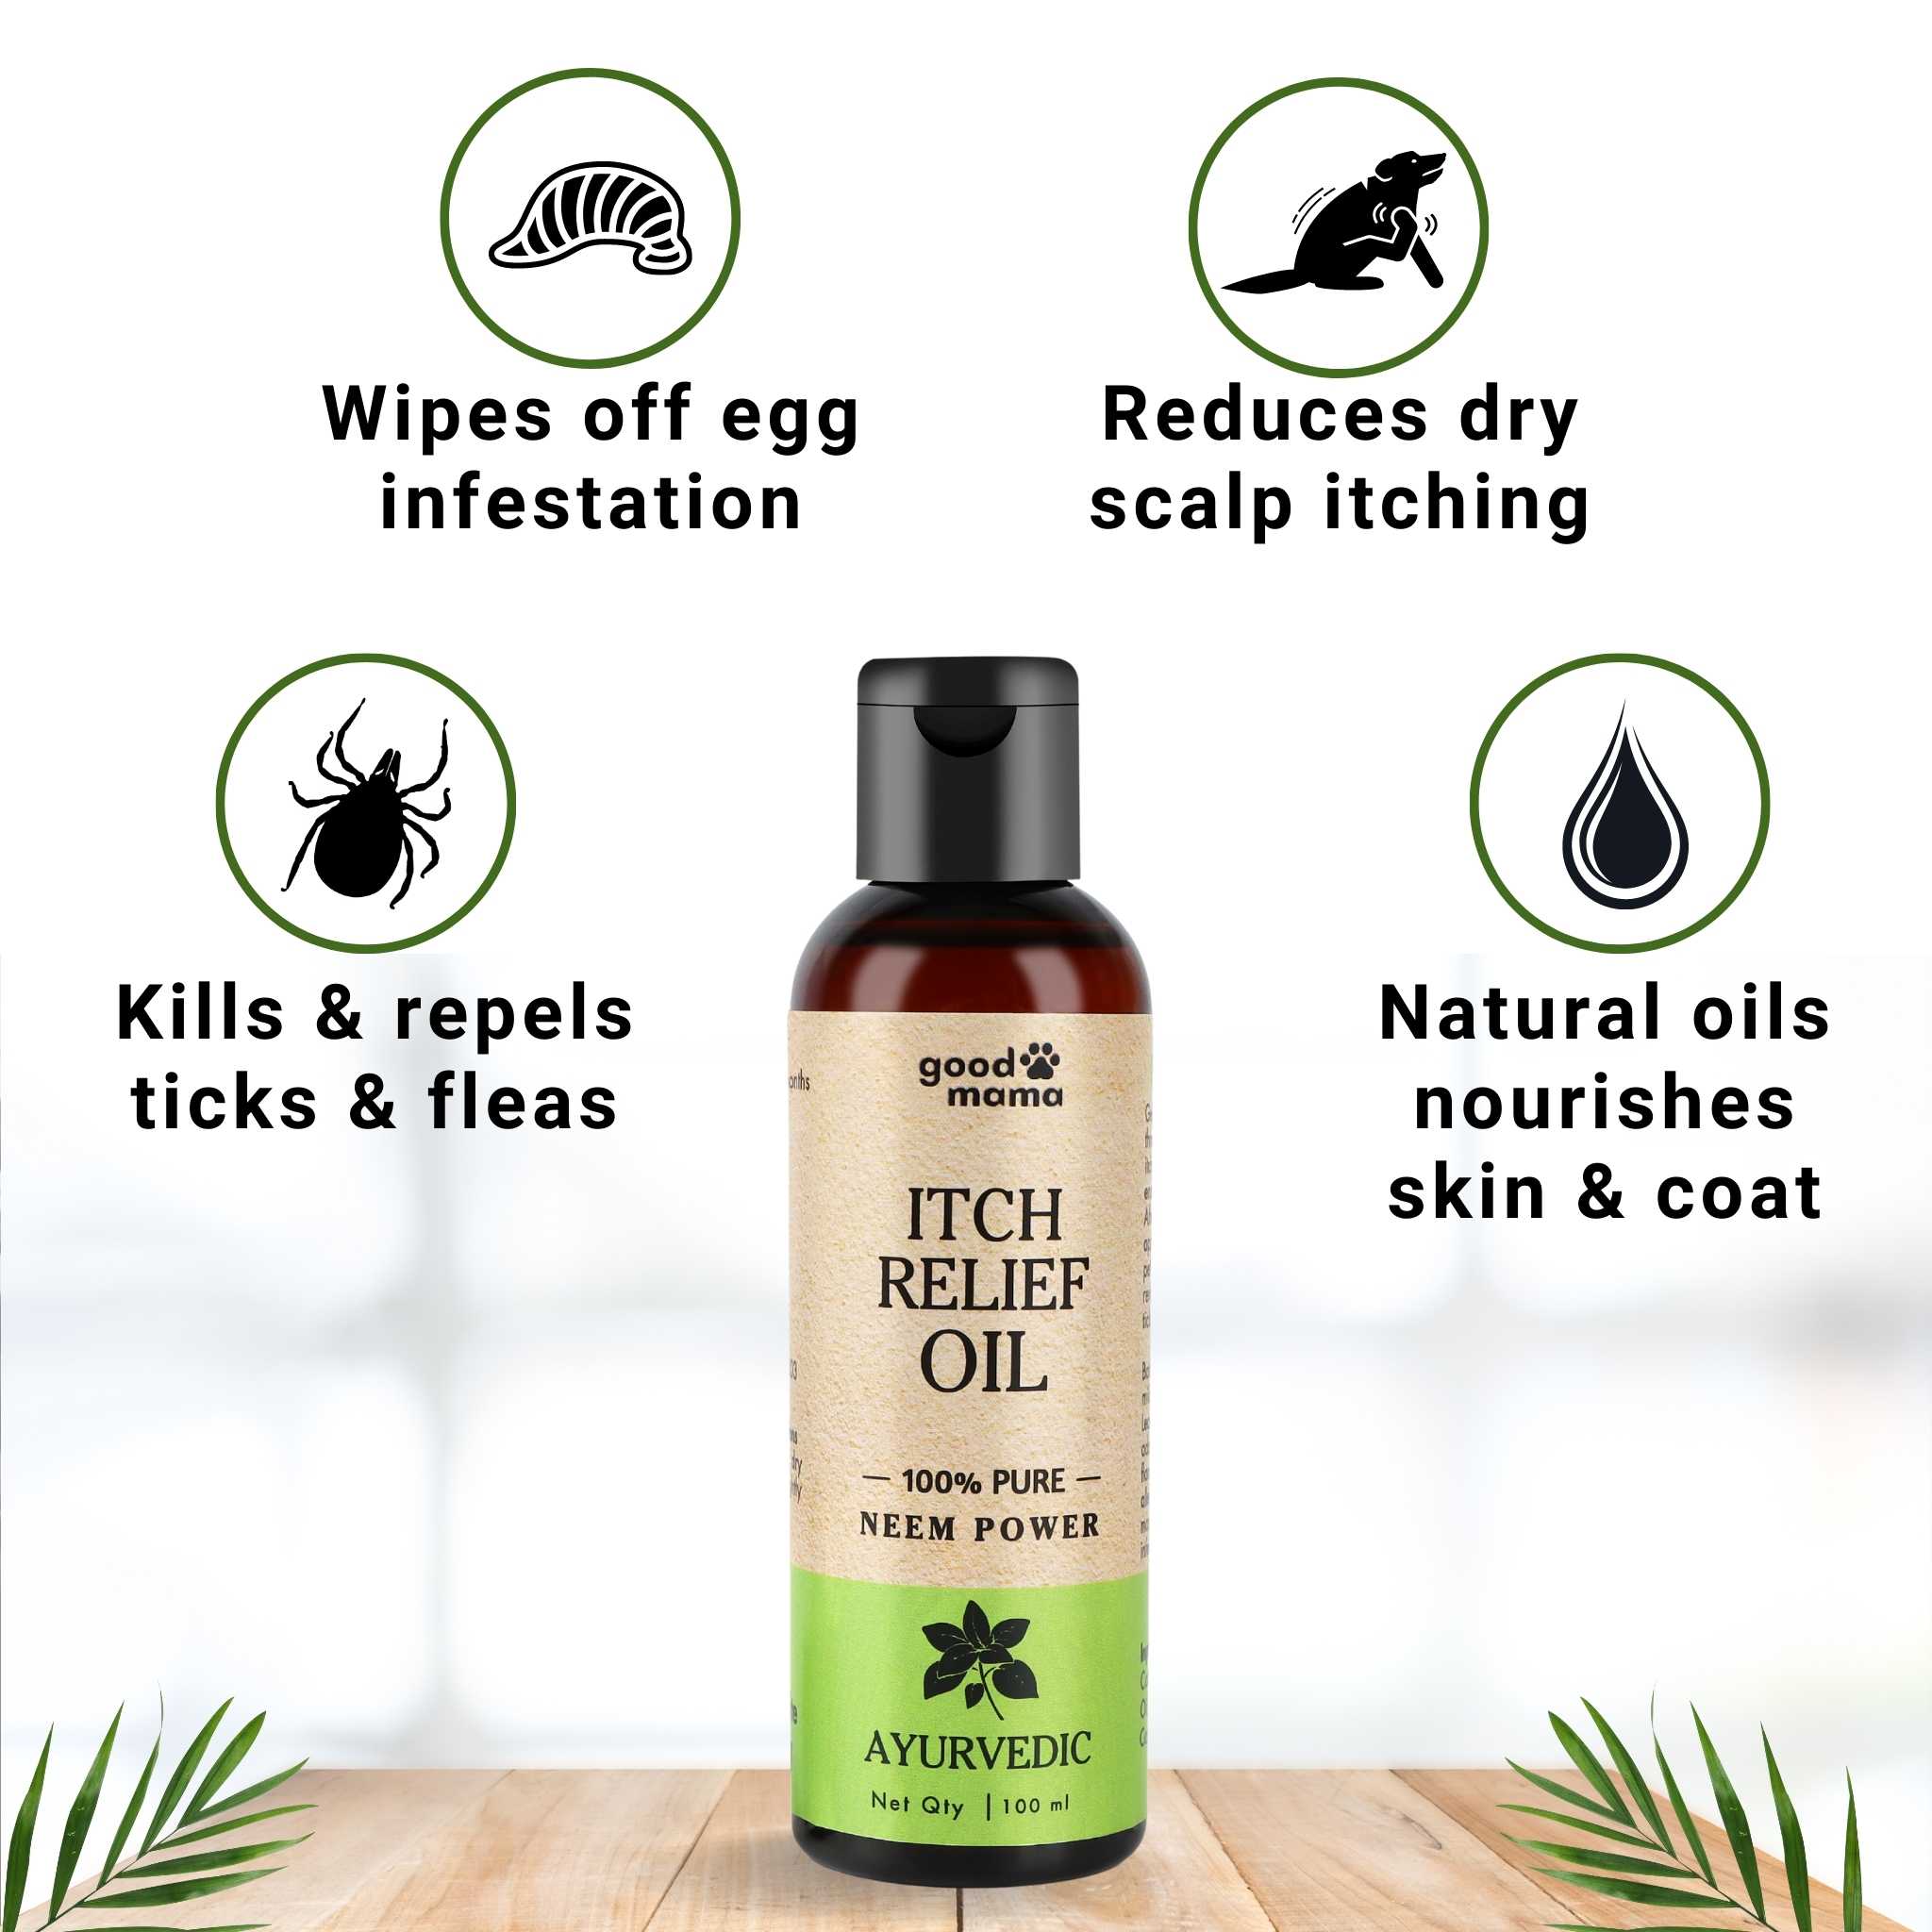 Itch Relief Oil